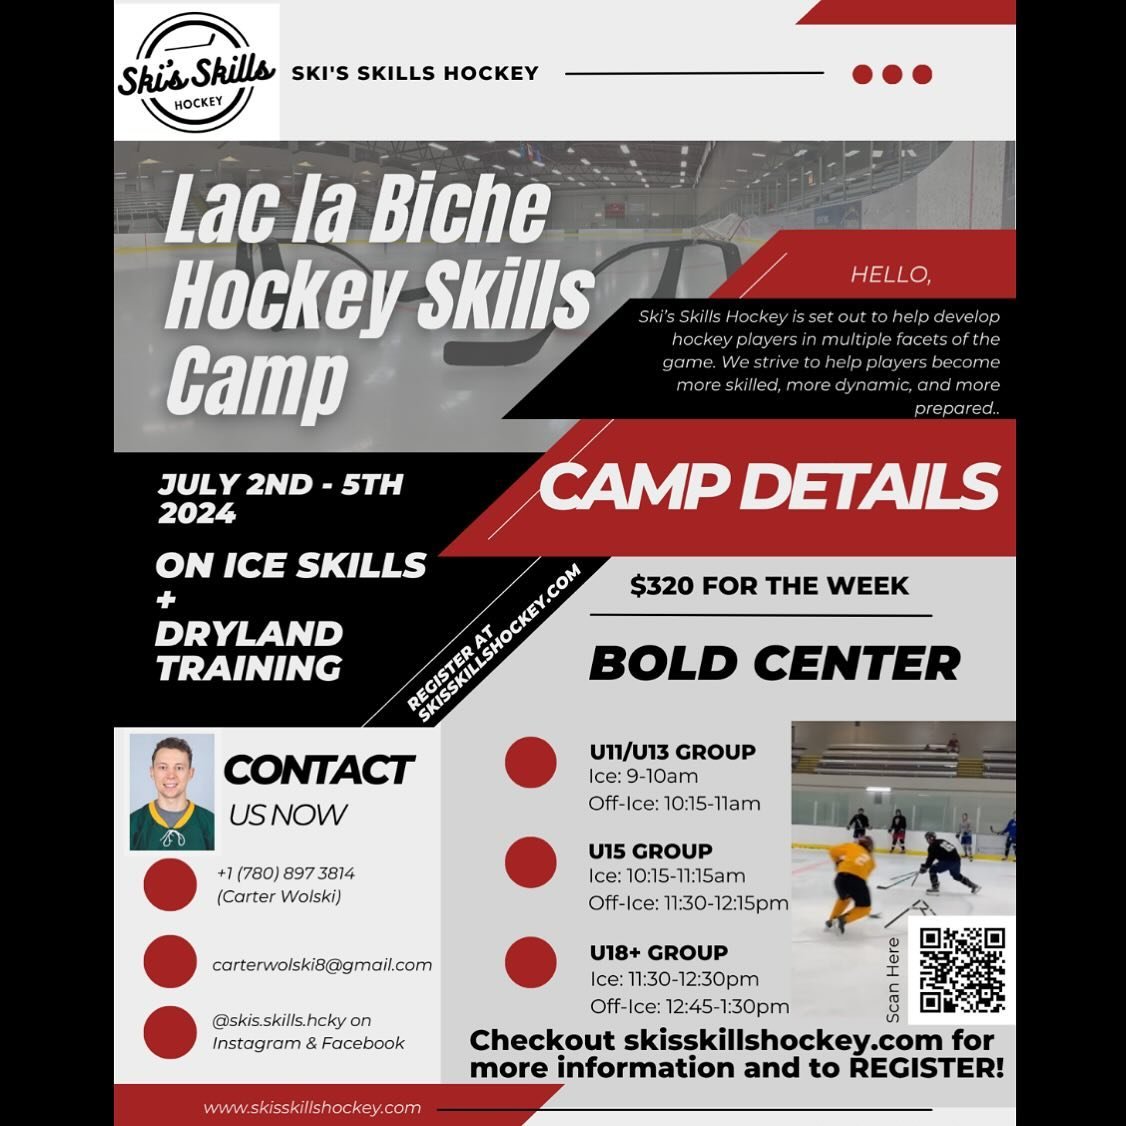 Lac la Biche Summer Skills+Dryland‼️🚨
-
Do not miss out on this fun week in Lac la Biche! Come develop your game transferable skills on the ice and strength, speed, agility, and athleticism off the ice! It&rsquo;s the best combination to become a be